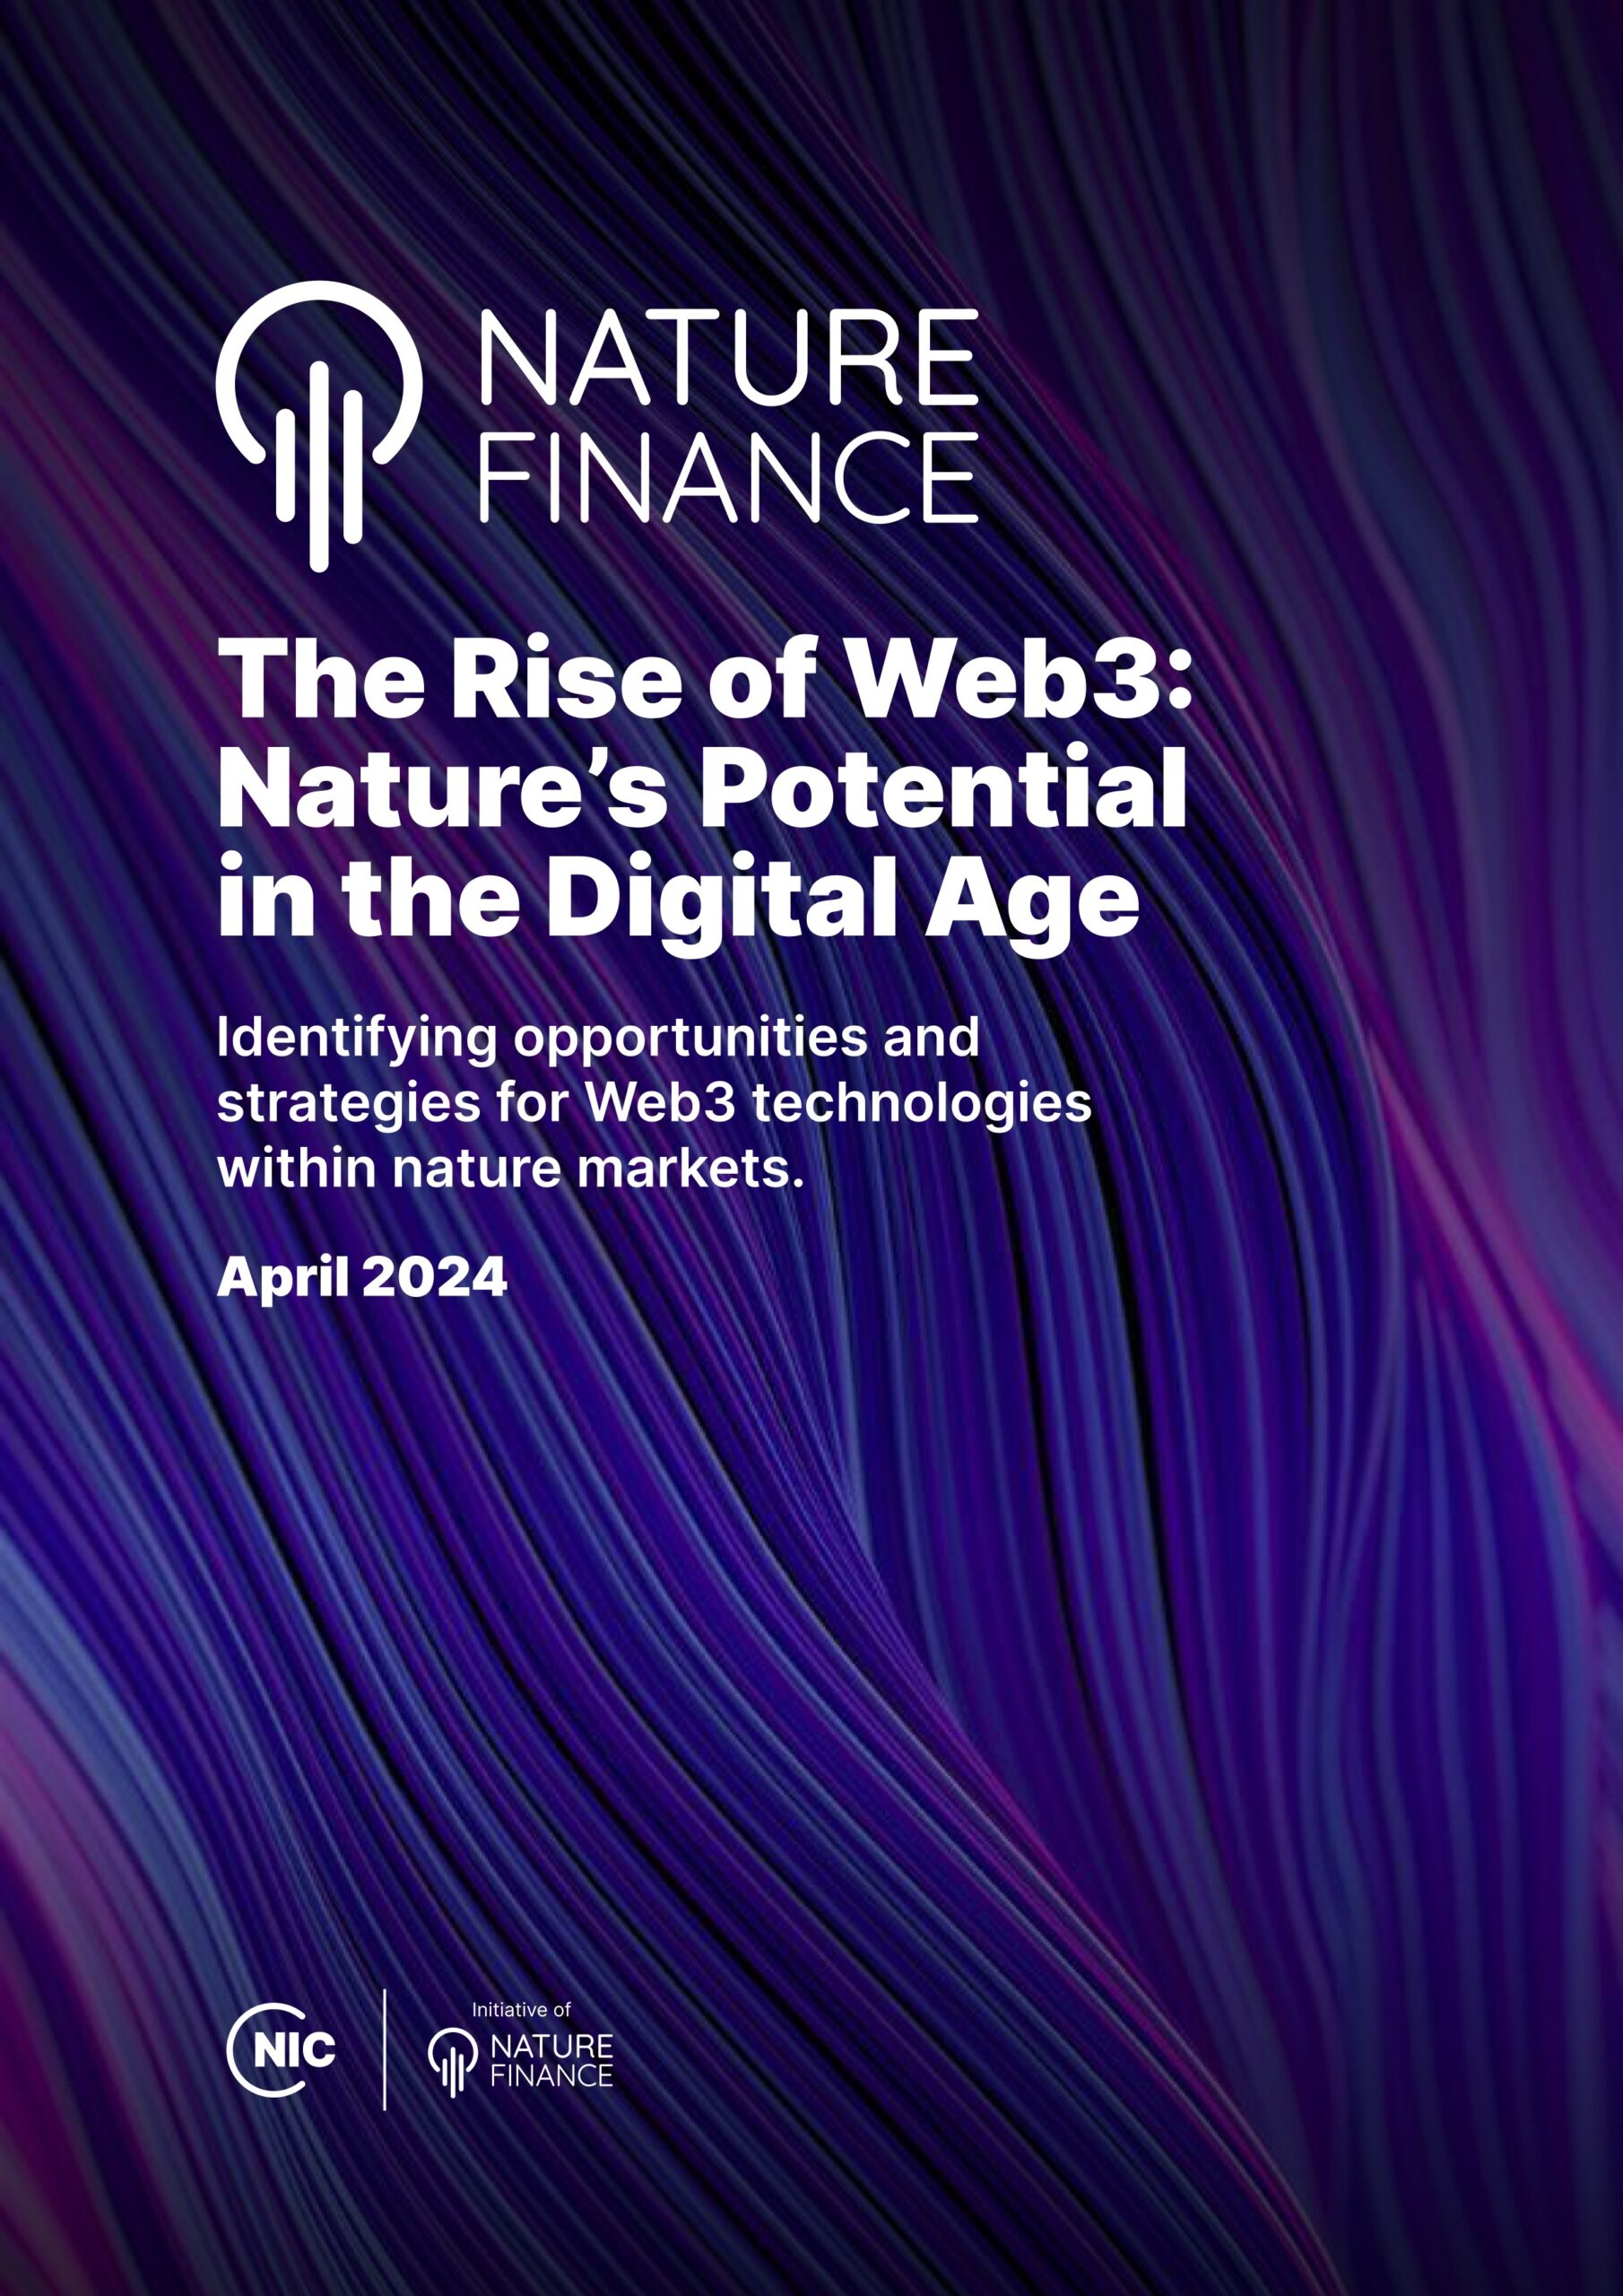 The Rise of Web3: Nature’s Potential in the Digital Age